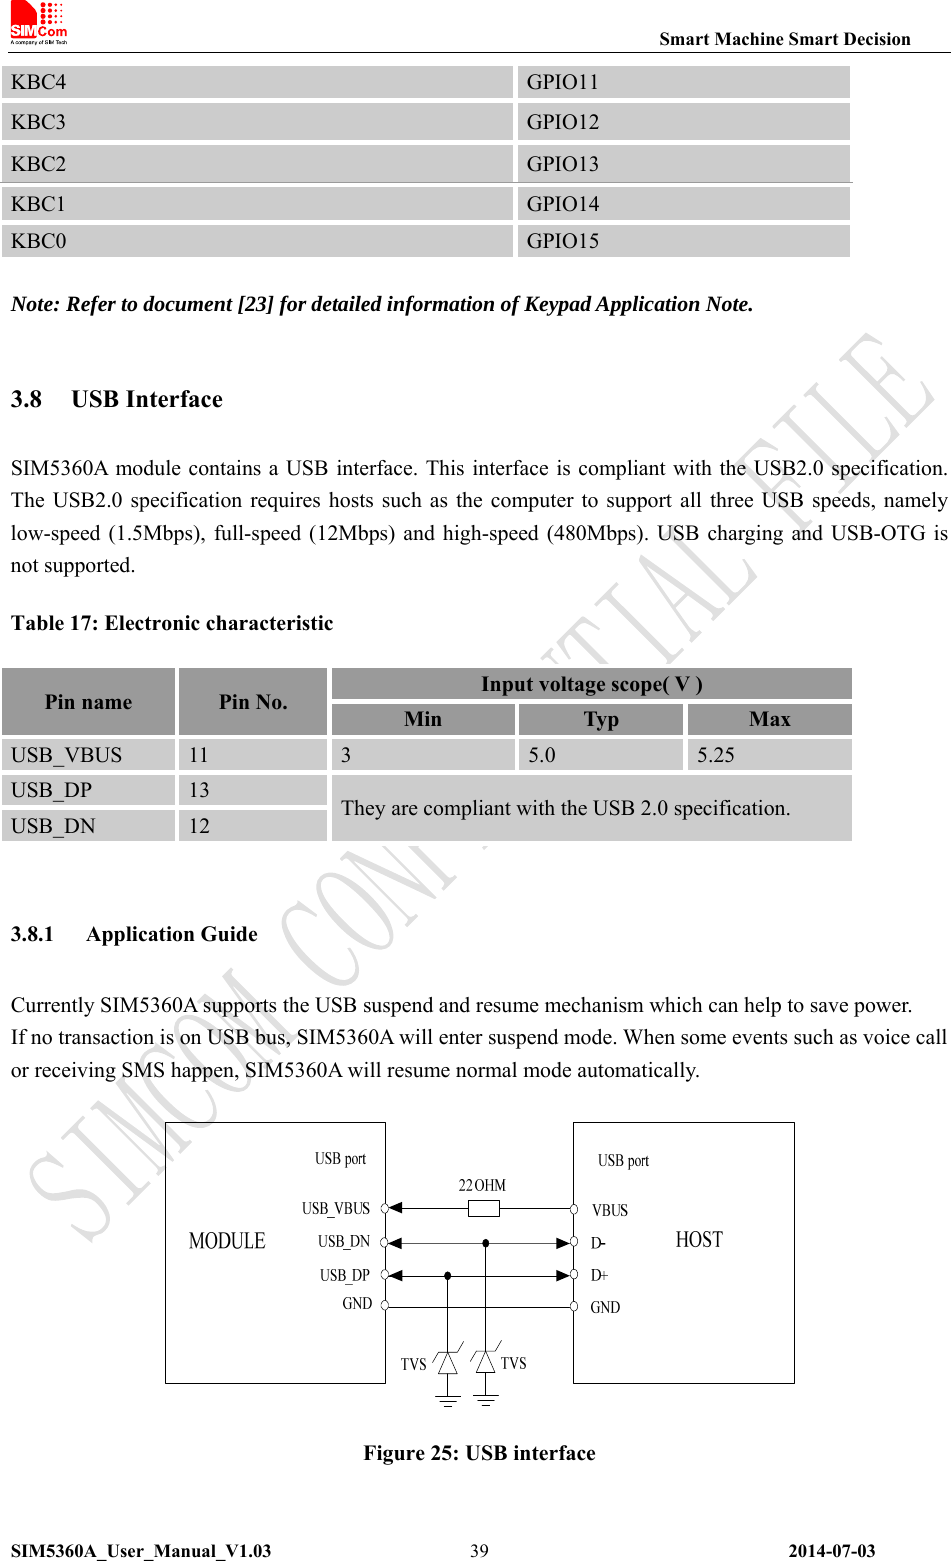                                                                Smart Machine Smart Decision SIM5360A_User_Manual_V1.03                 2014-07-03 39KBC4  GPIO11 KBC3  GPIO12 KBC2  GPIO13 KBC1  GPIO14 KBC0  GPIO15  Note: Refer to document [23] for detailed information of Keypad Application Note.  3.8 USB Interface SIM5360A module contains a USB interface. This interface is compliant with the USB2.0 specification. The  USB2.0 specification  requires hosts such  as the  computer to support all three USB speeds, namely low-speed (1.5Mbps), full-speed (12Mbps) and  high-speed (480Mbps). USB  charging  and USB-OTG  is not supported. Table 17: Electronic characteristic Pin name  Pin No.  Input voltage scope( V ) Min  Typ  Max USB_VBUS  11  3  5.0  5.25 USB_DP  13  They are compliant with the USB 2.0 specification. USB_DN  12  3.8.1 Application Guide Currently SIM5360A supports the USB suspend and resume mechanism which can help to save power.   If no transaction is on USB bus, SIM5360A will enter suspend mode. When some events such as voice call or receiving SMS happen, SIM5360A will resume normal mode automatically.   Figure 25: USB interface 